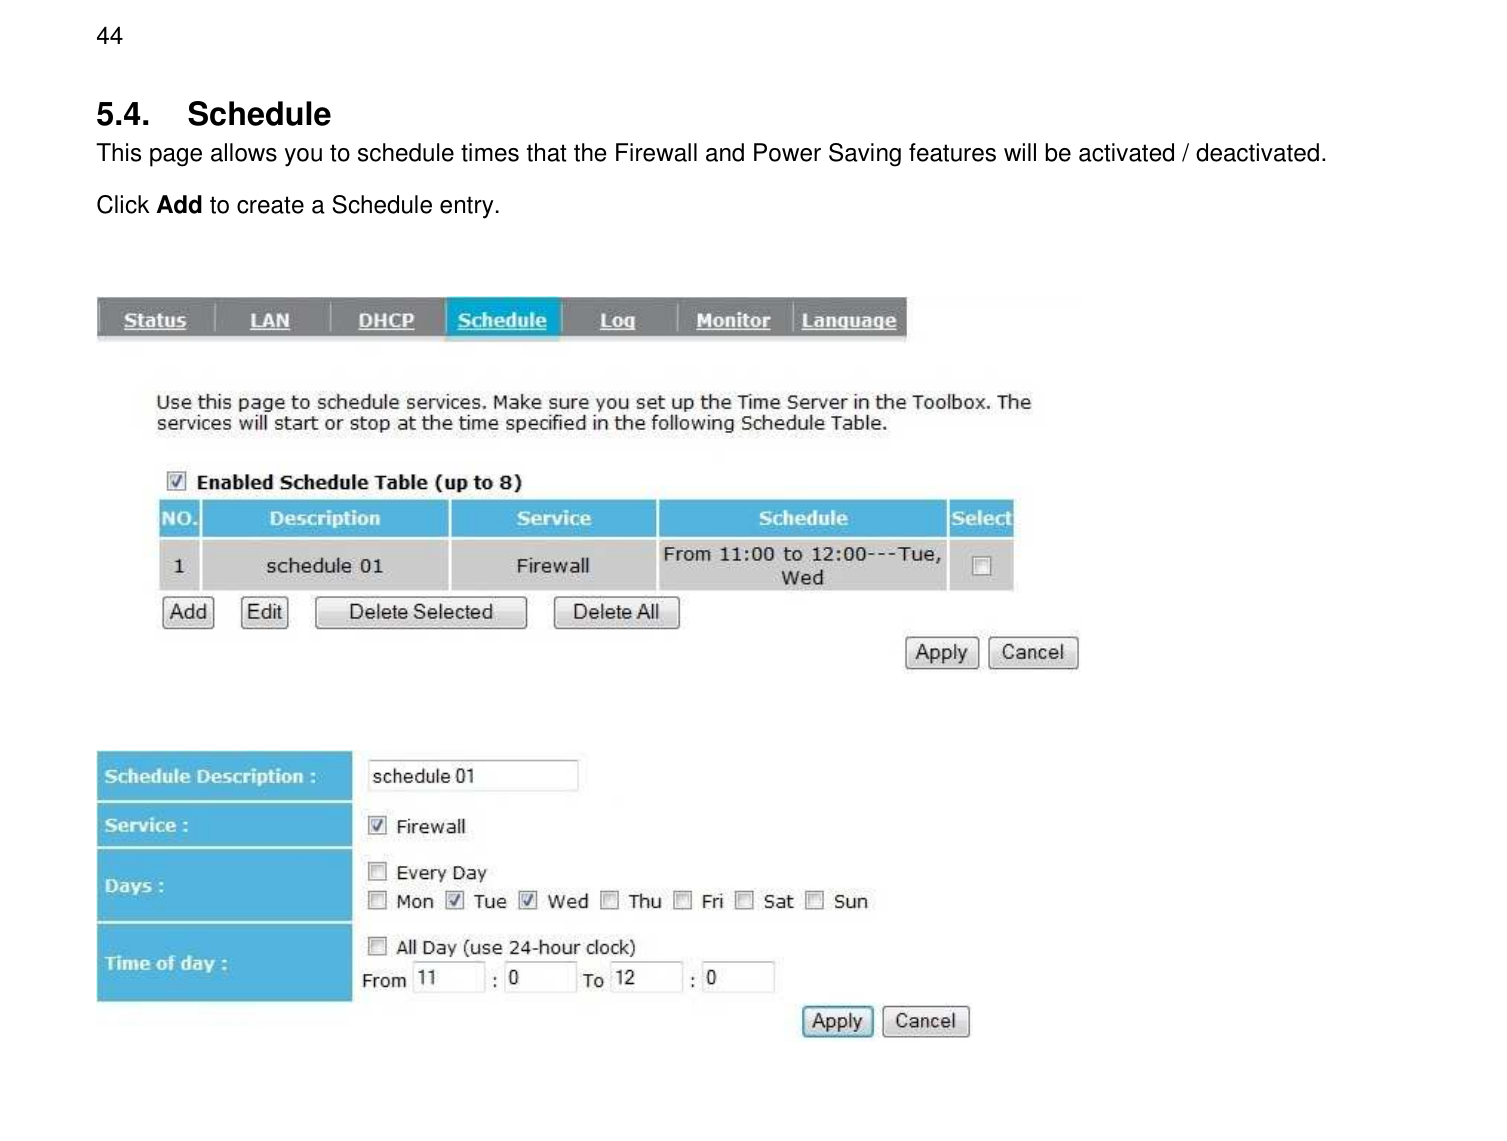  44 5.4.  Schedule This page allows you to schedule times that the Firewall and Power Saving features will be activated / deactivated. Click Add to create a Schedule entry.     